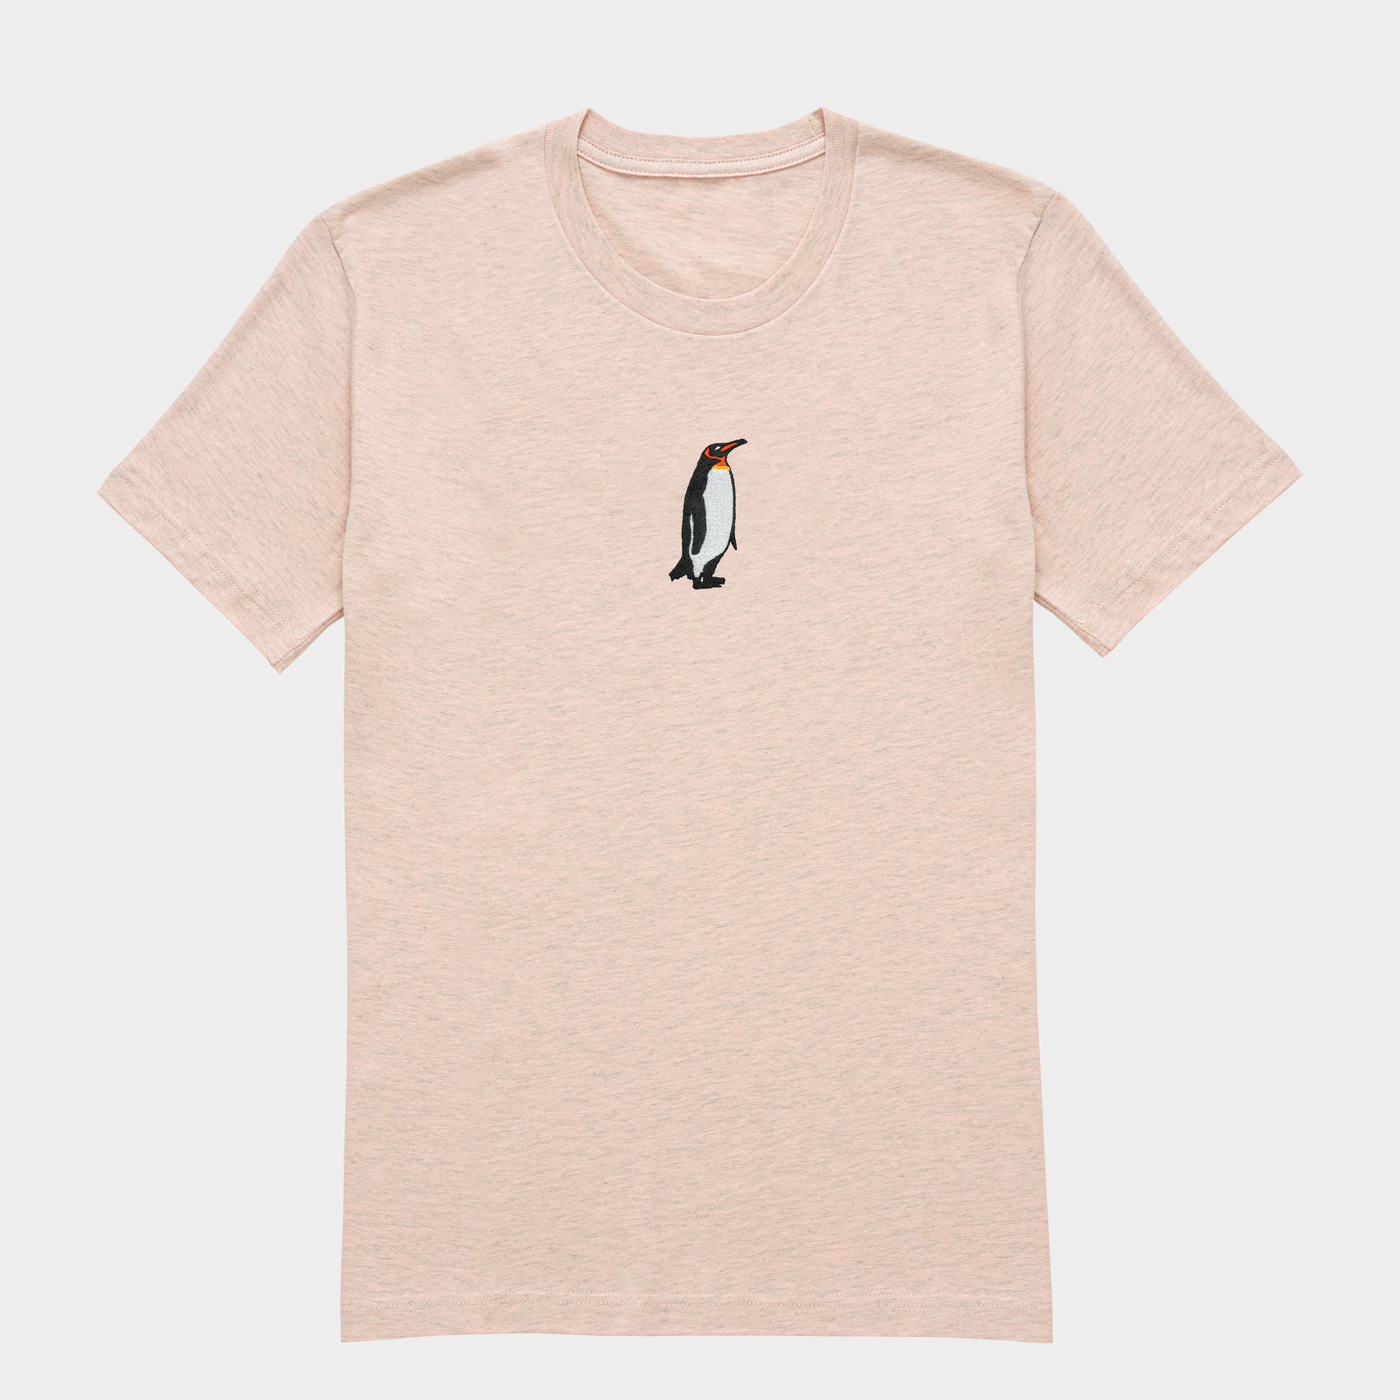 Bobby's Planet Women's Embroidered Penguin T-Shirt from Arctic Polar Animals Collection in Heather Prism Peach Color#color_heather-prism-peach